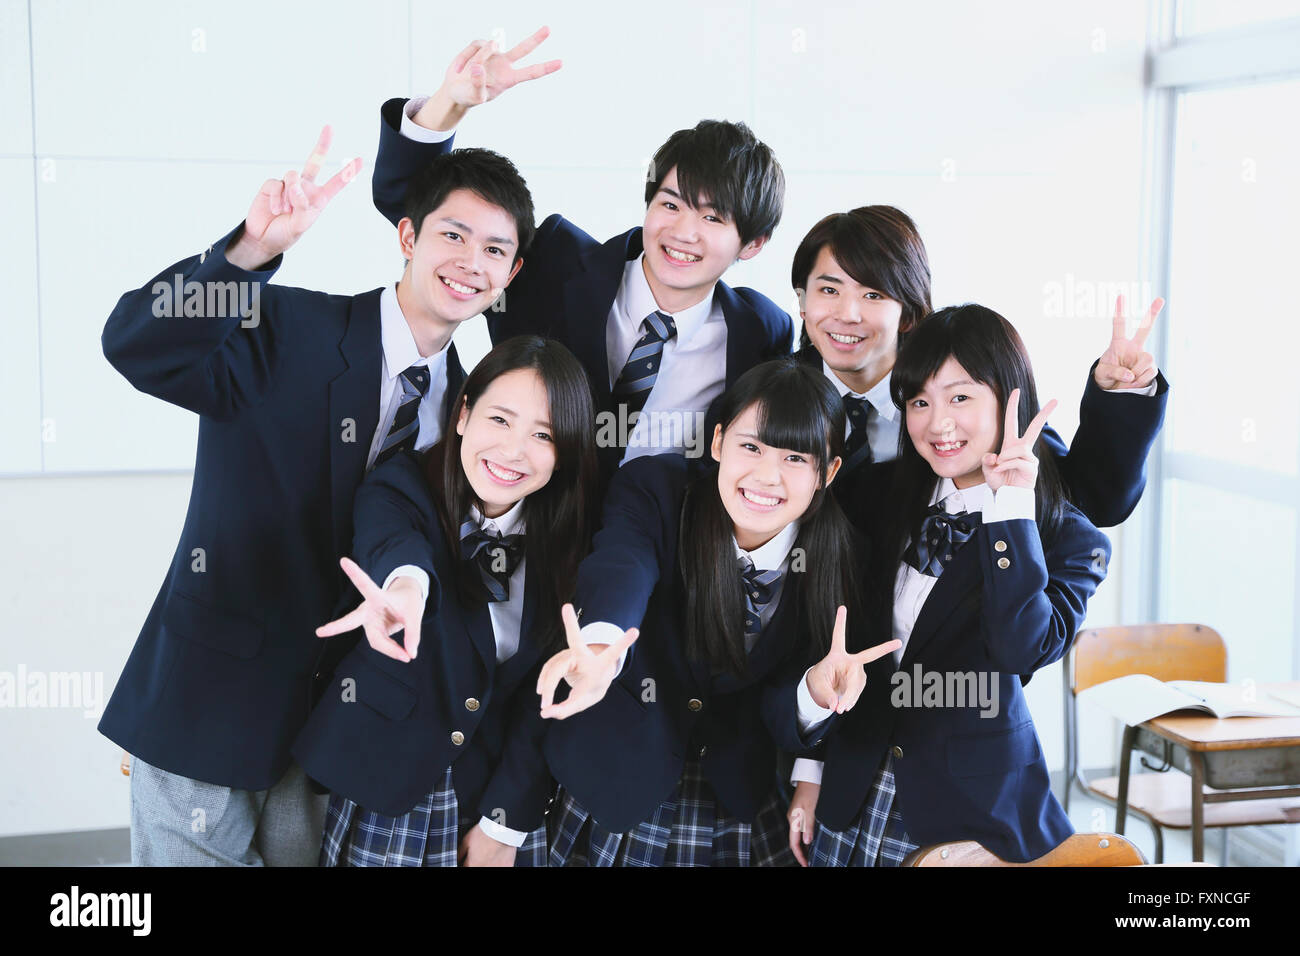 Japanese high-school student taking group shot in classroom Stock Photo